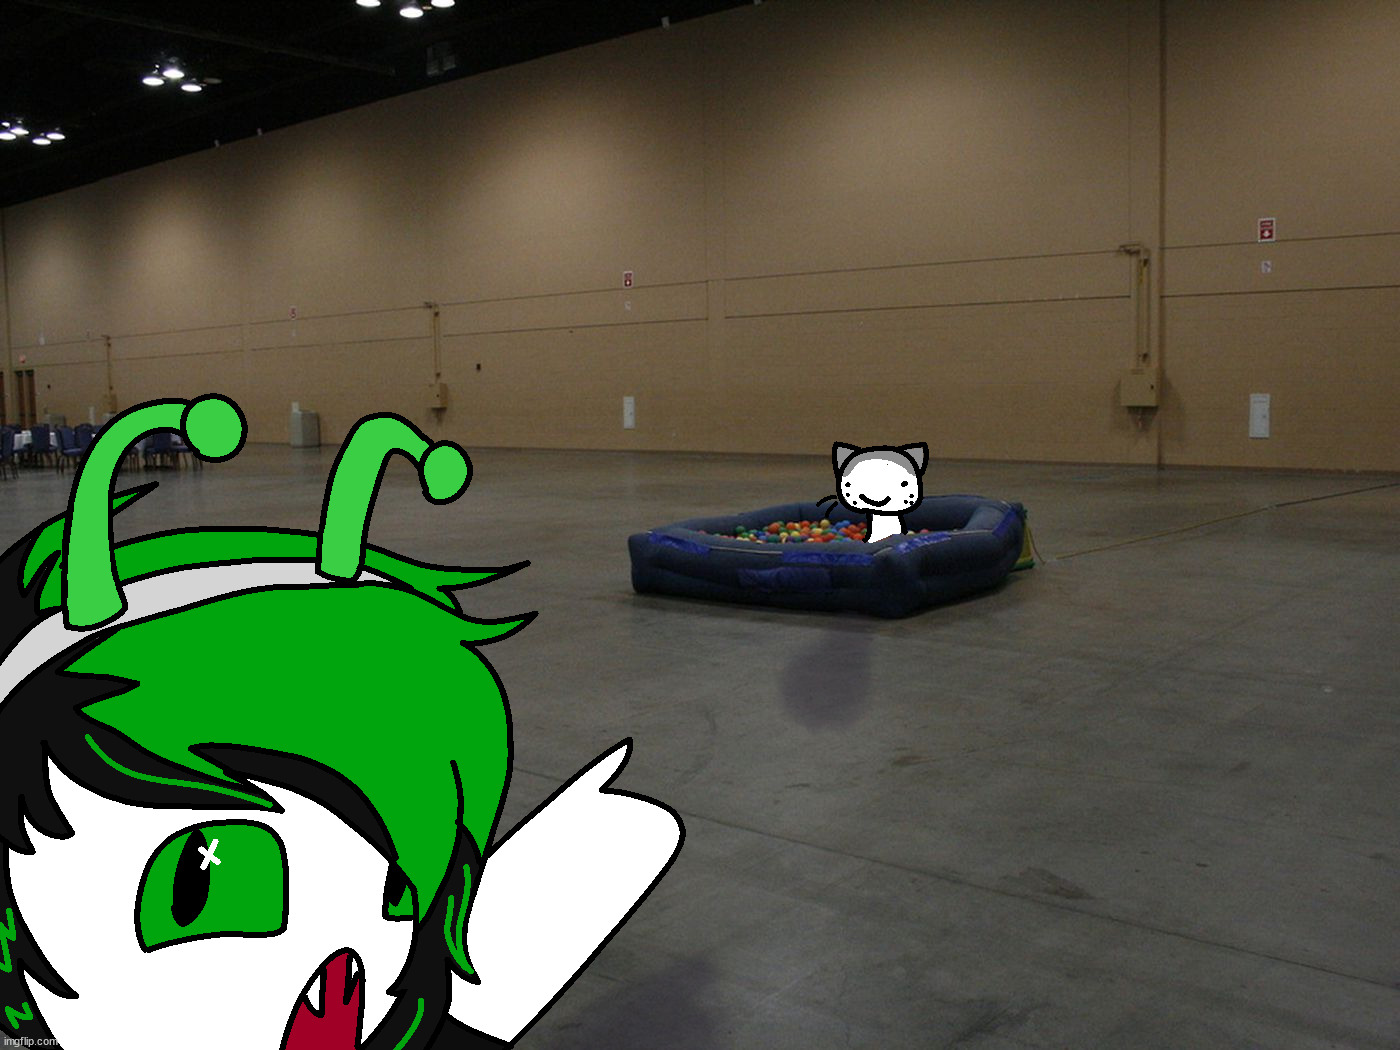 dashie spotted at dashcon 100% real | made w/ Imgflip meme maker